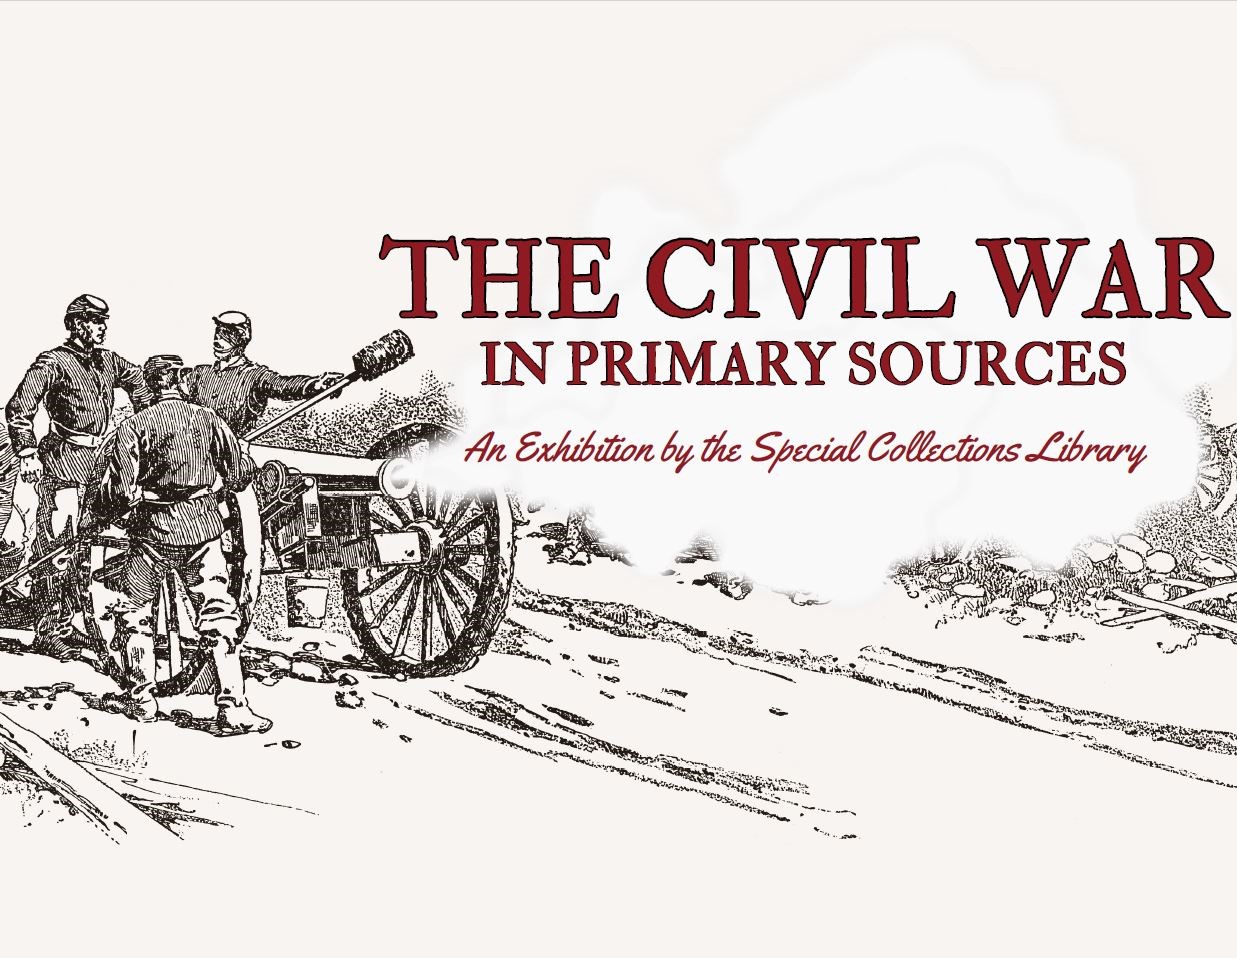 The Civil War in Primary Resources: An Exhibition by the Special Collections Library